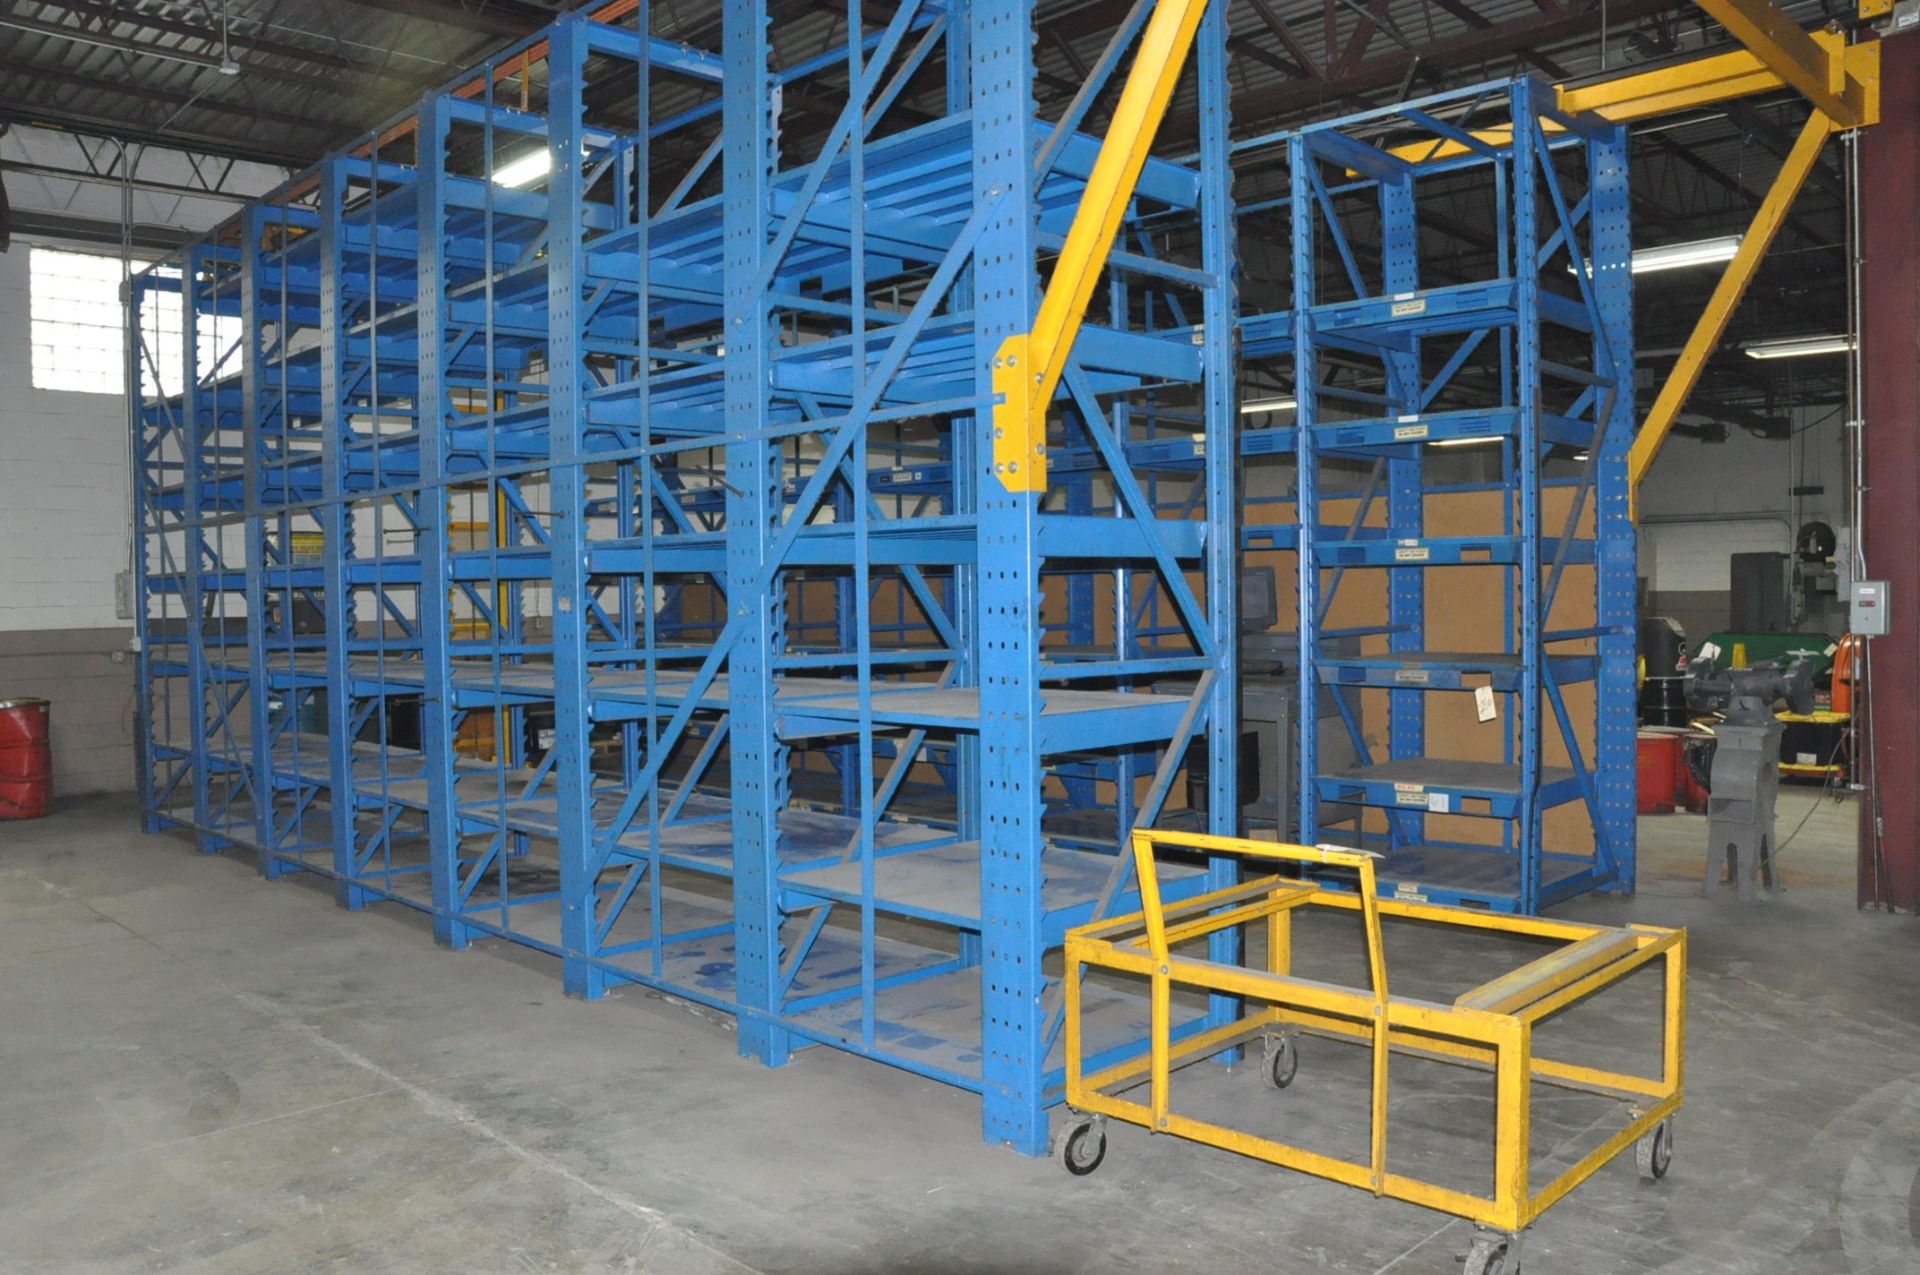 STANLEY STAK SYSTEM MODULAR RACK STACKING SYSTEM, 2,000-Lbs. Capacity Lift, (14) Sections Adjustable - Image 4 of 4